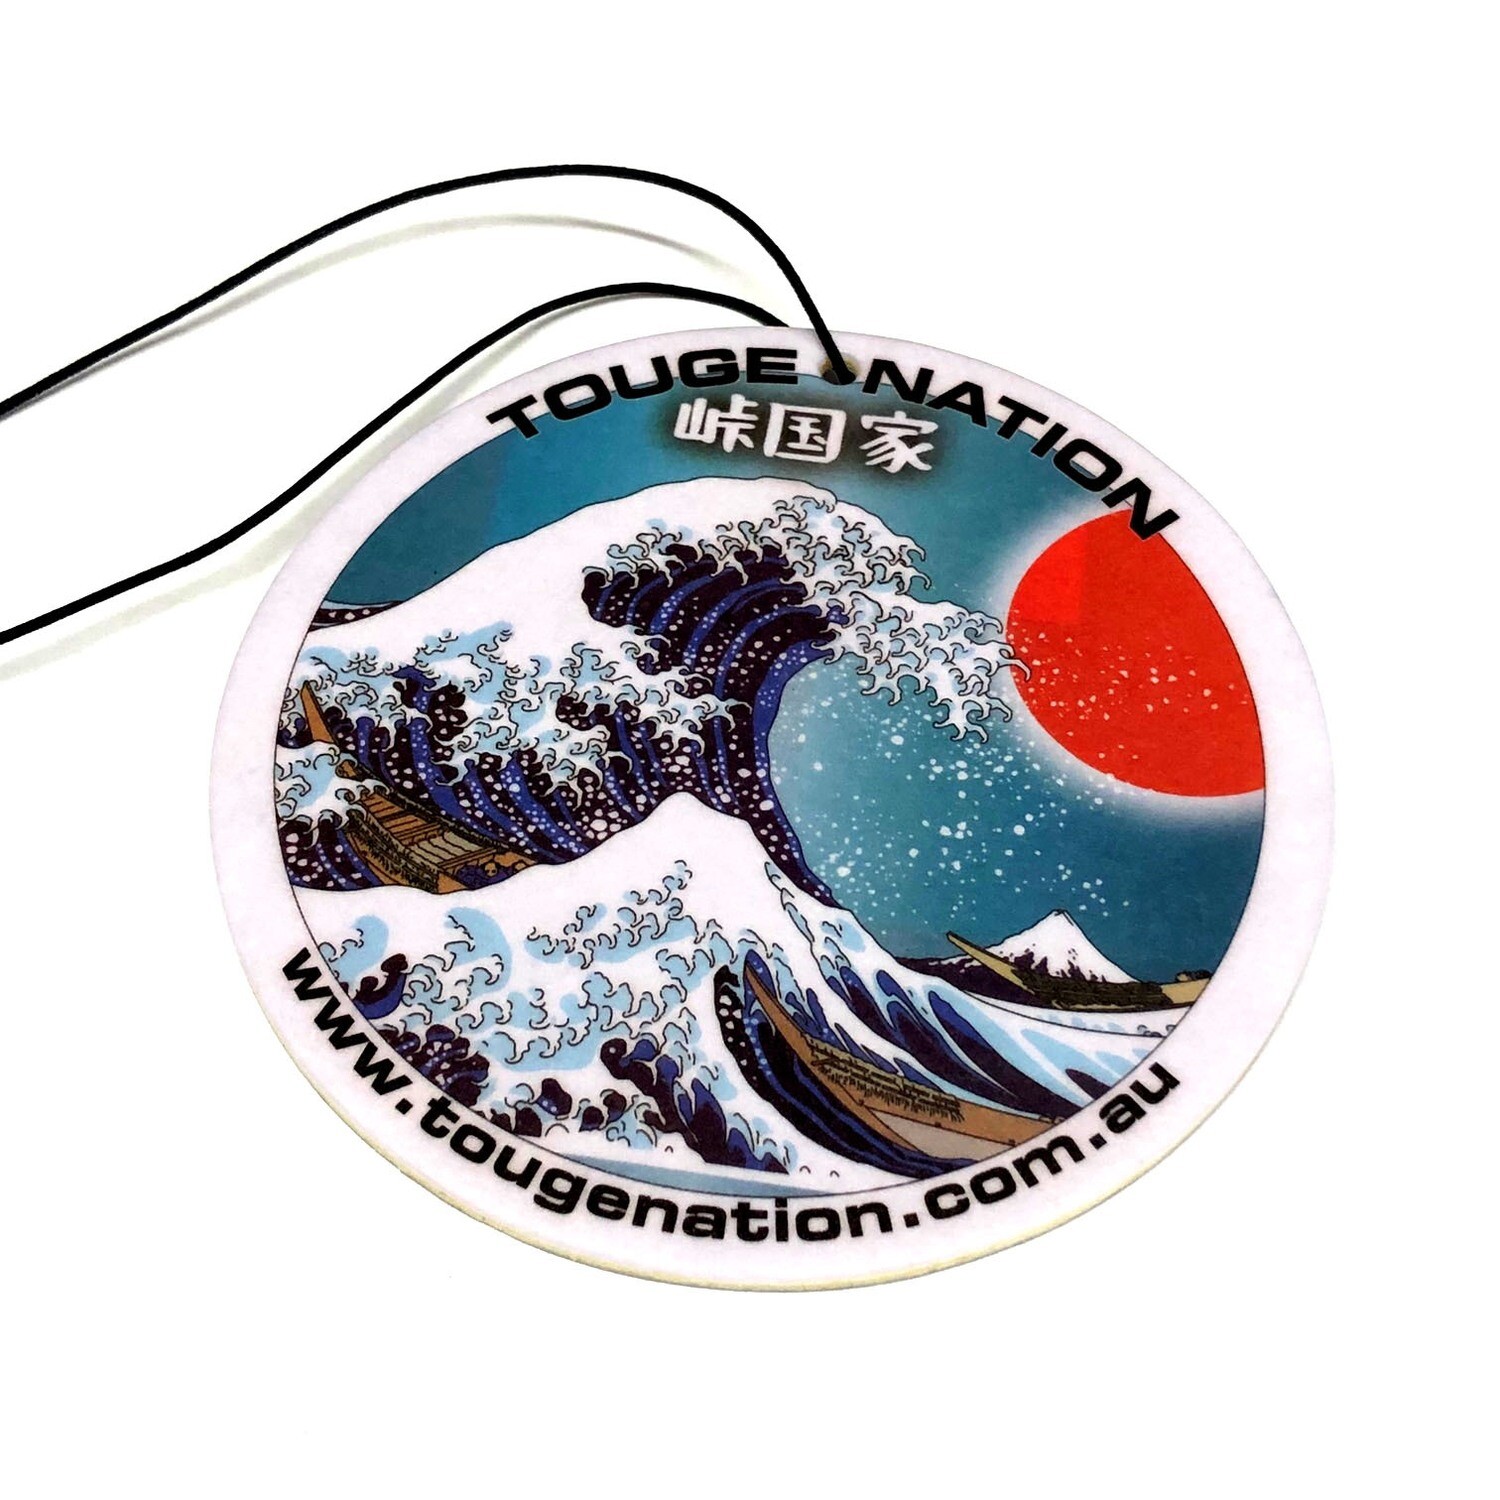 TOUGE NATION "THE GREAT WAVE" AIR FRESHENER